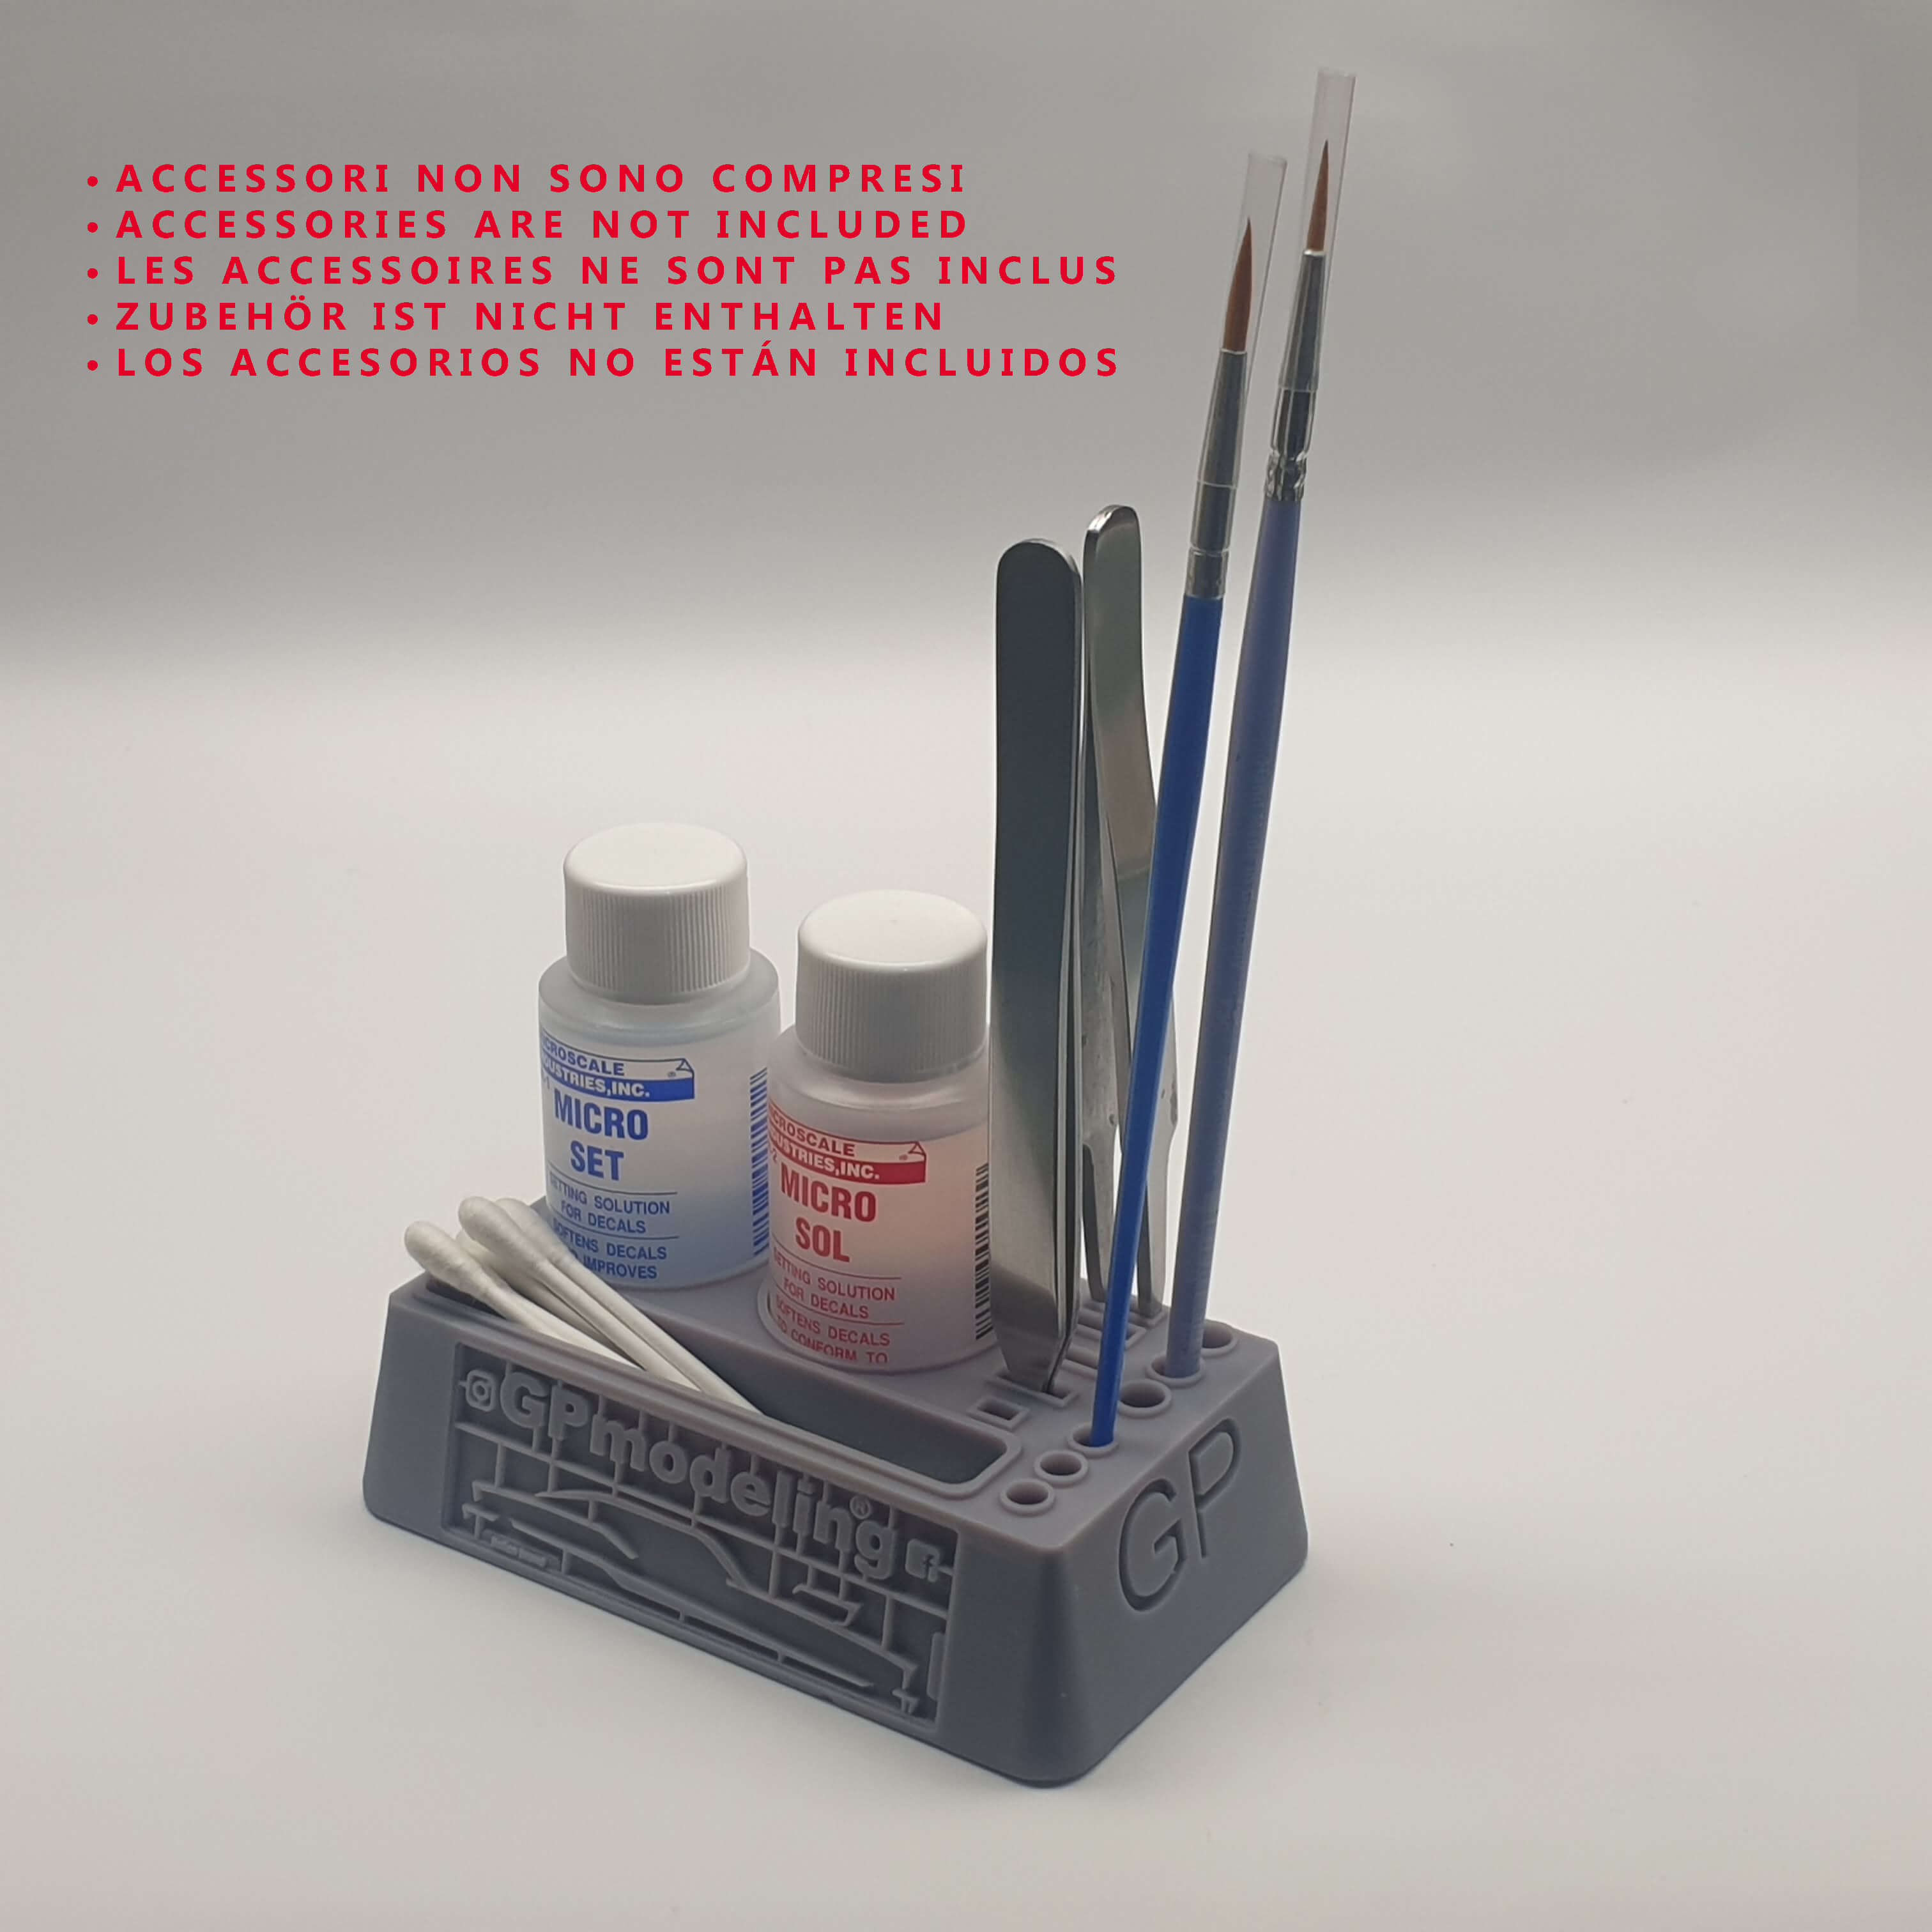 GPmodeling holder for Microscale and Tamiya Tools